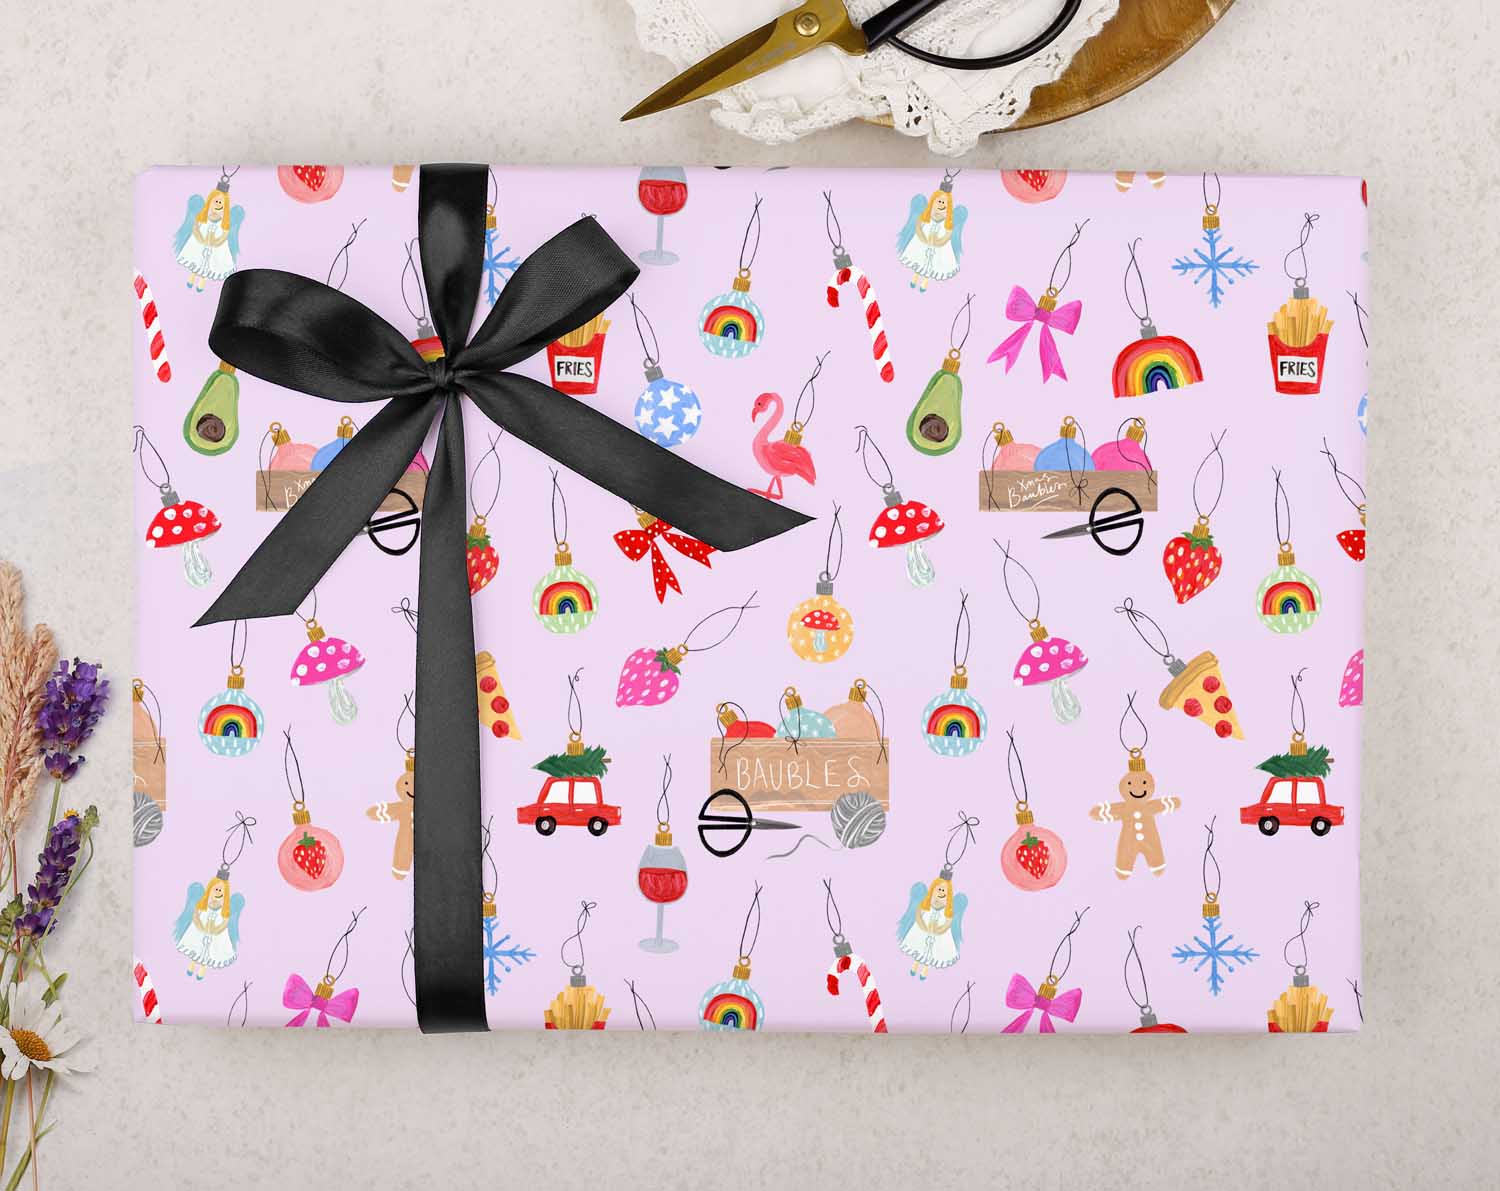 festive Christmas wrapping paper is filled with Christmas Ornaments on a lilac background